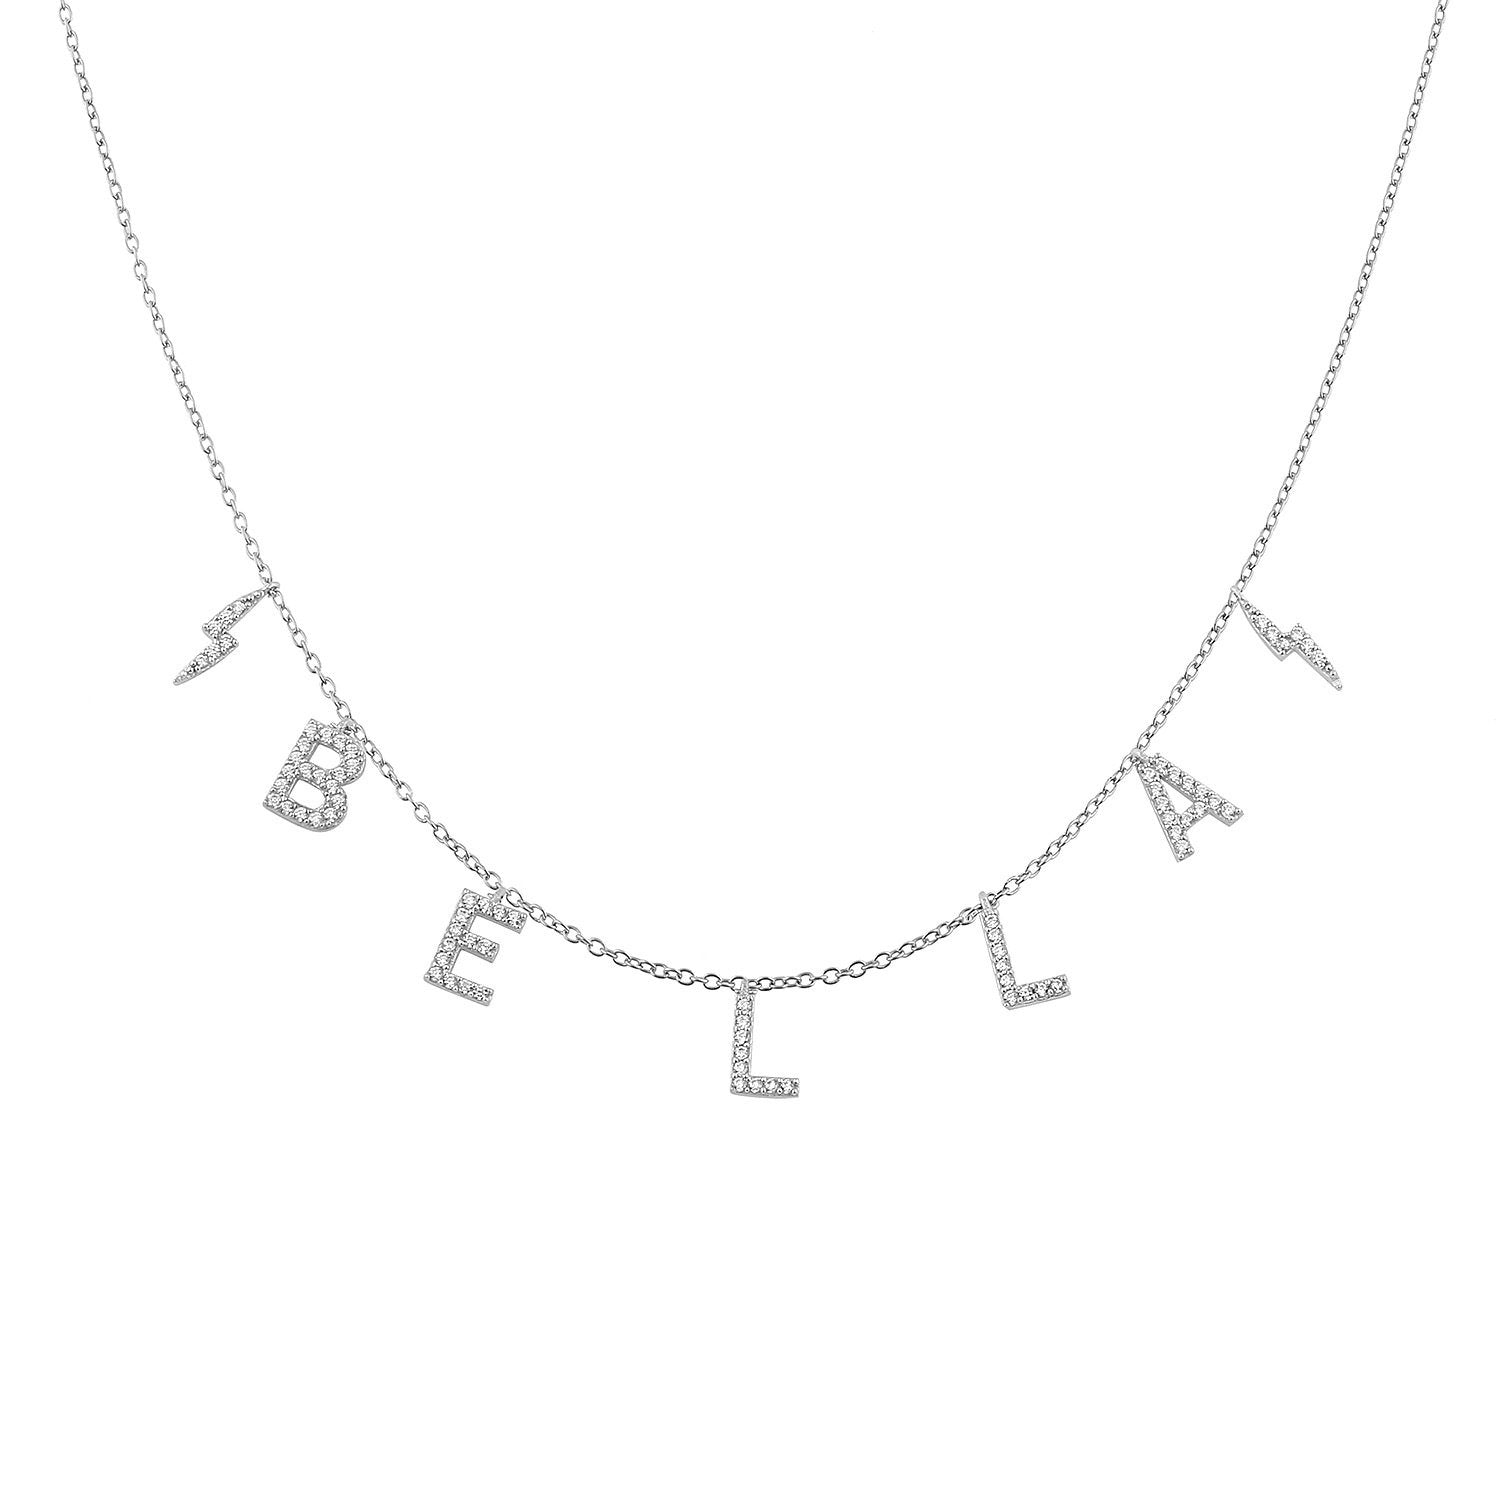 Water Resistant It’s All in a Name® Personalized Necklace-Necklaces-TSK® Custom Jewelry-Urban Threadz Boutique, Women's Fashion Boutique in Saugatuck, MI